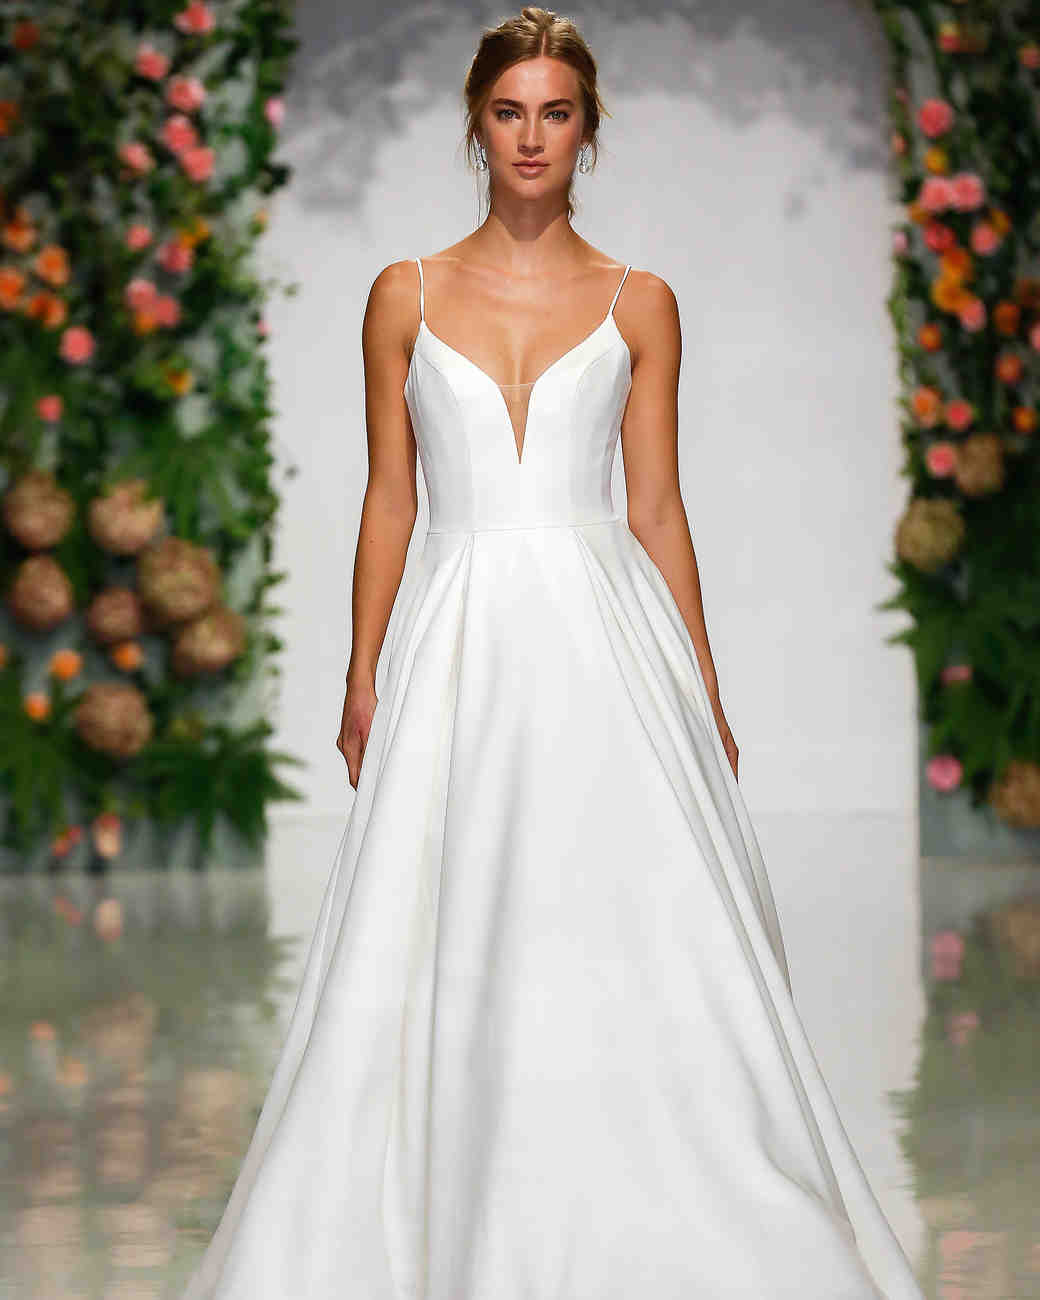 Simple Wedding Dresses That Are Just Plain Chic Martha